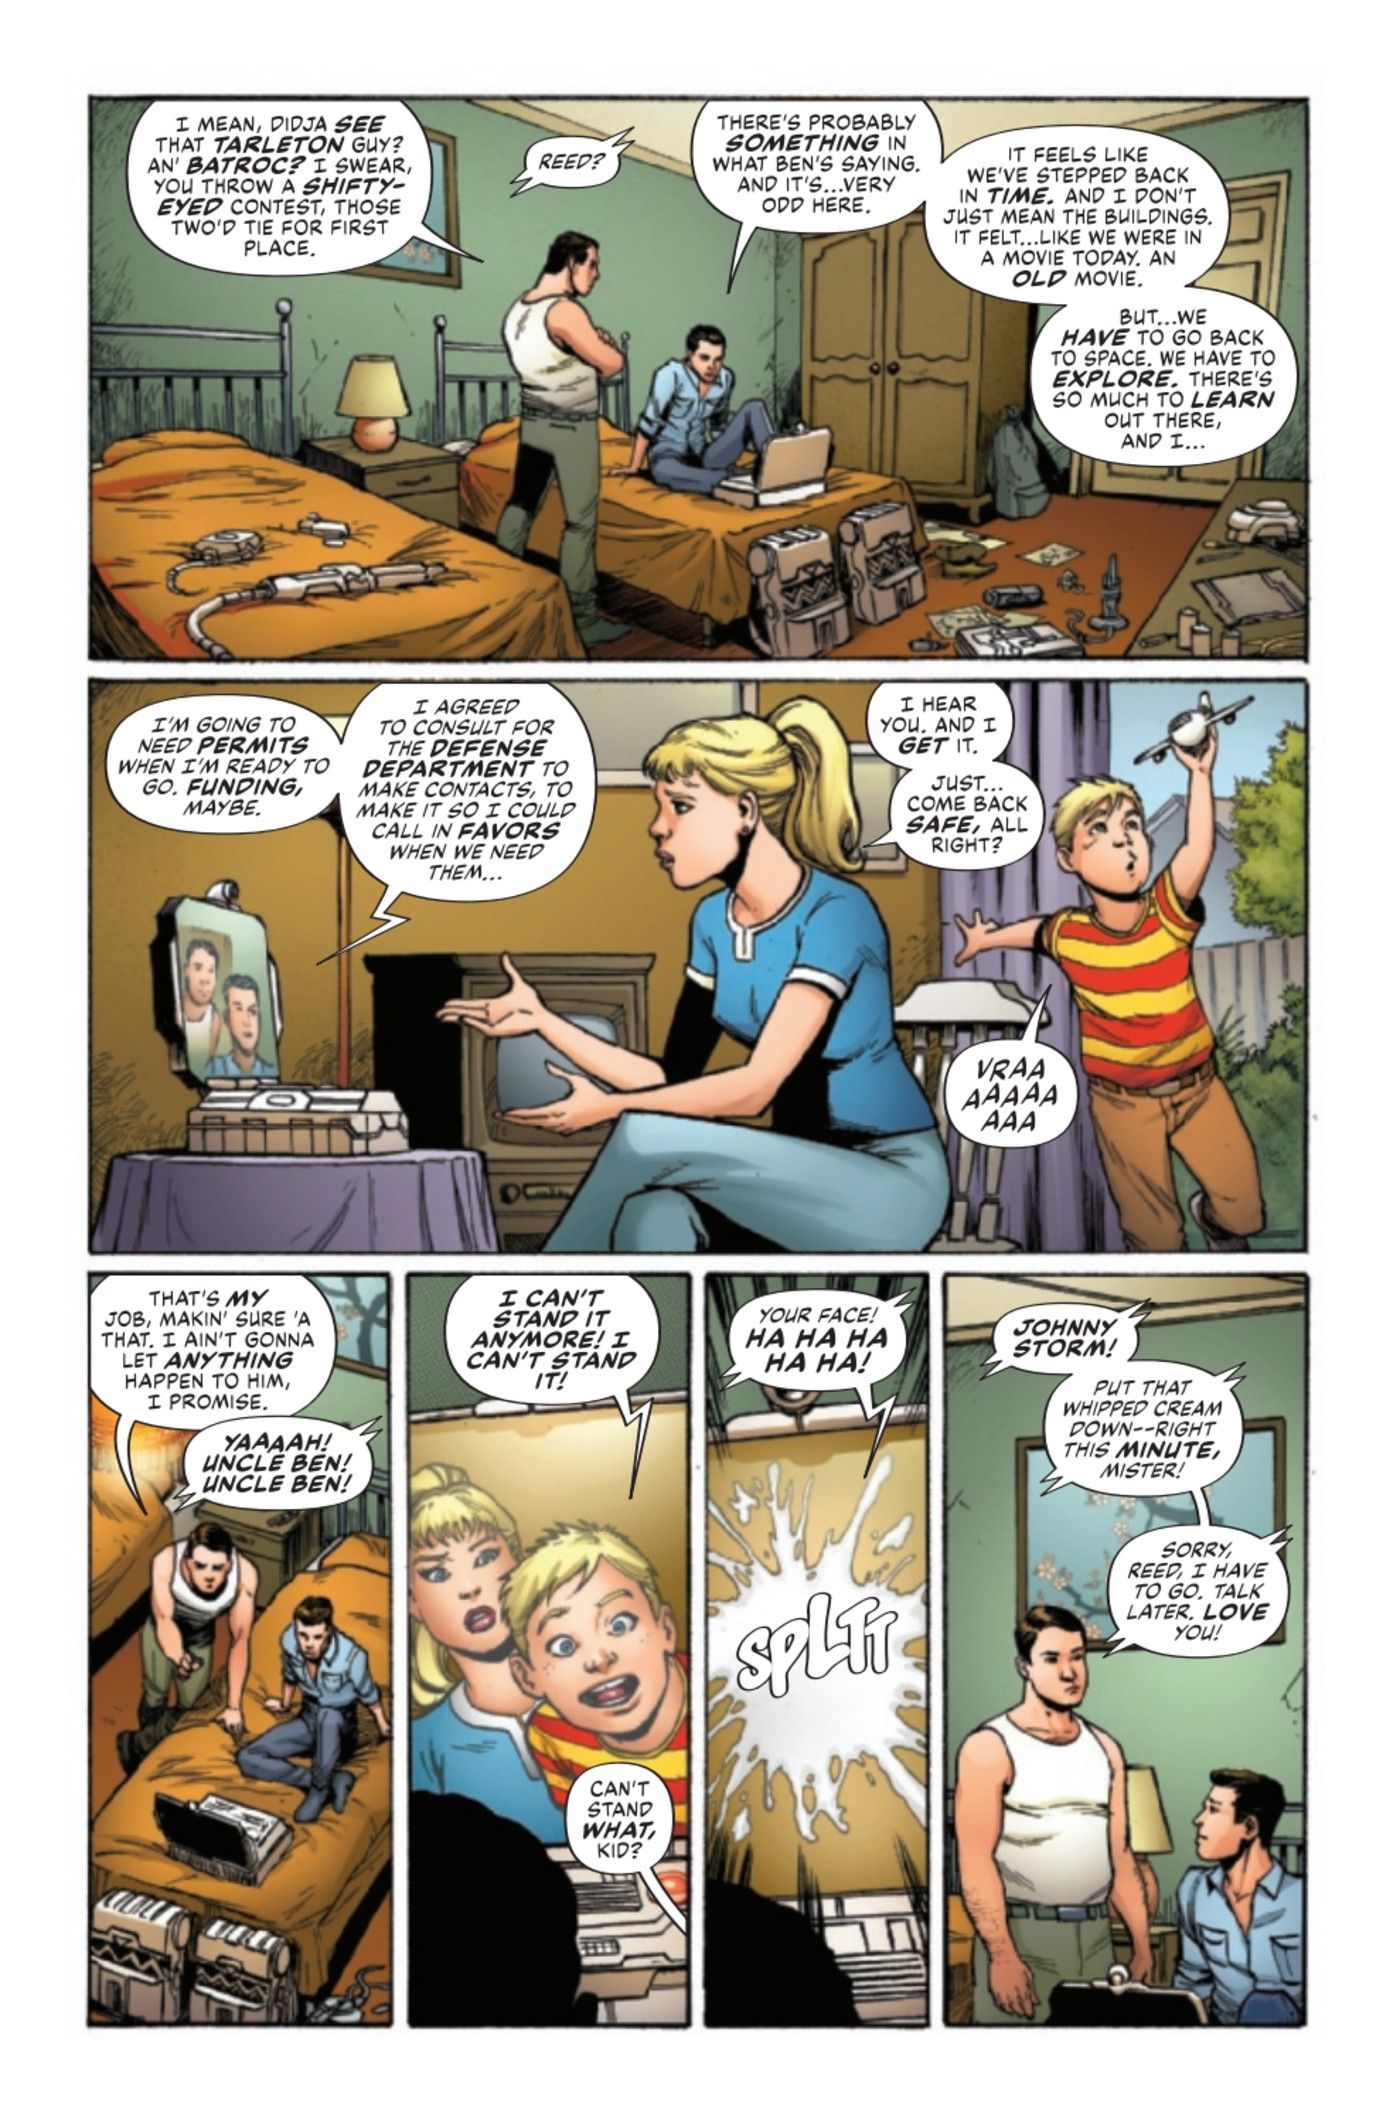 The Marvels #3 preview page 1 fantastic four